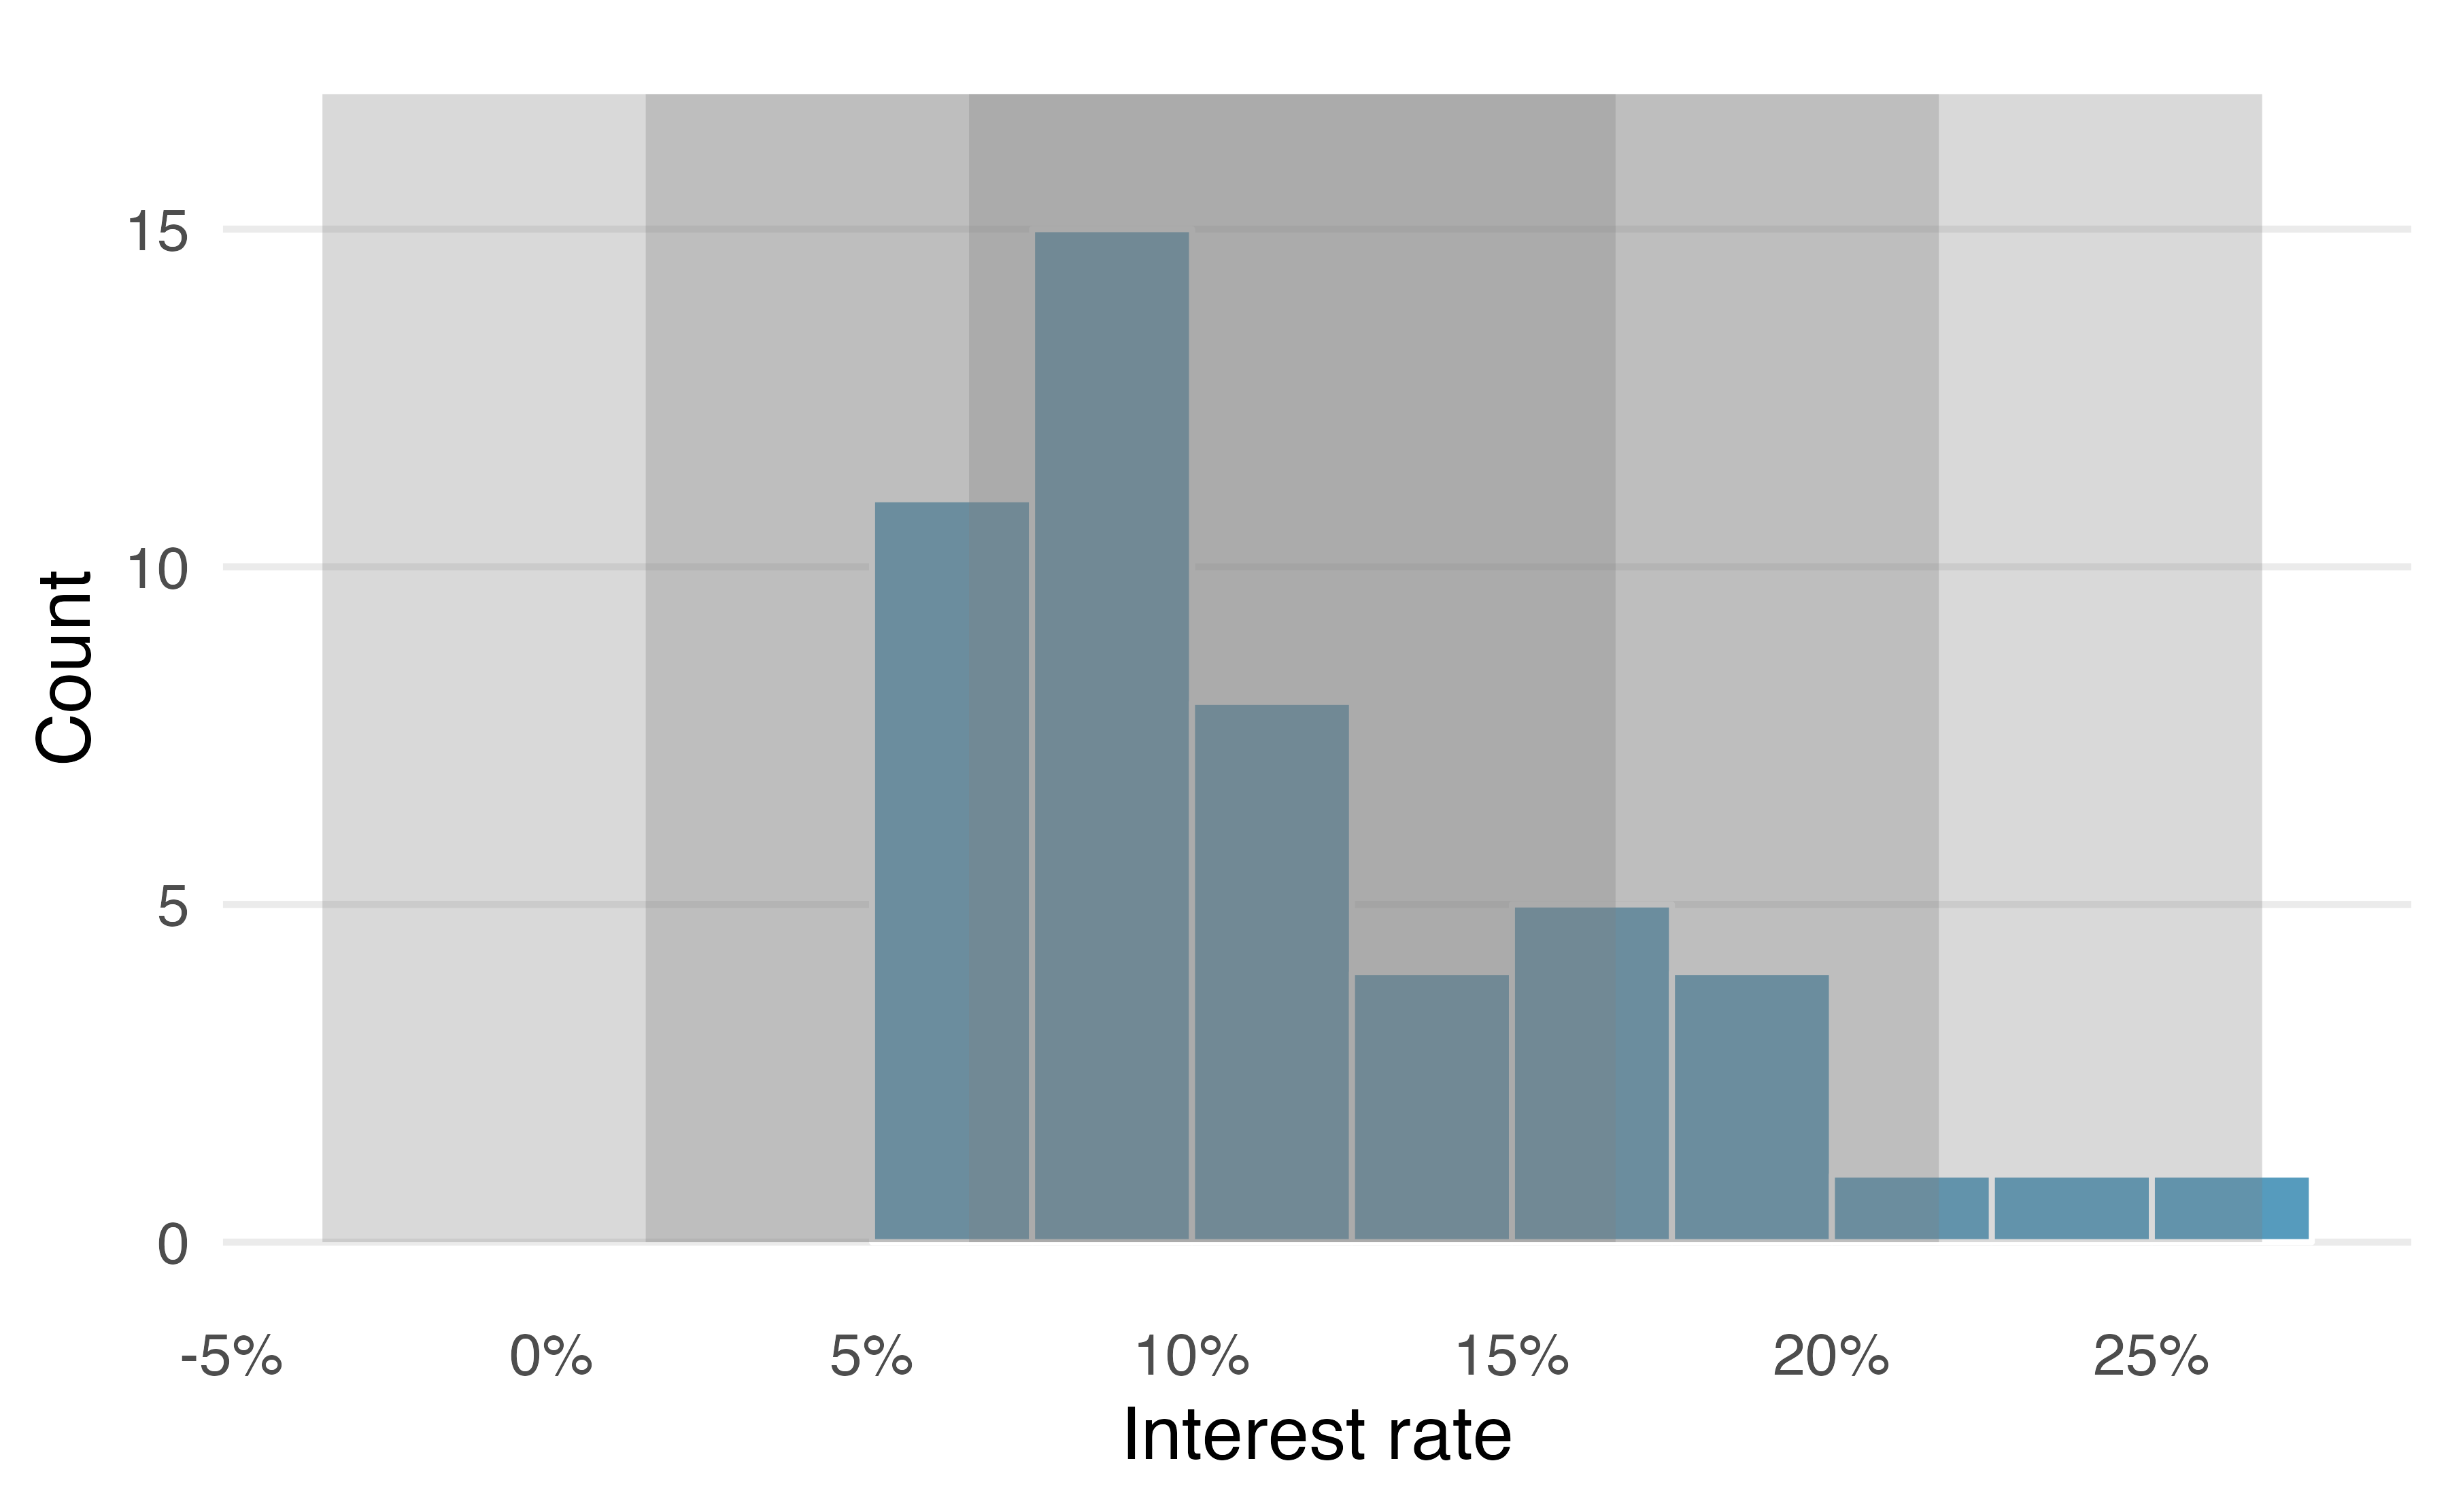 For the interest rate variable, 34 of the 50 loans (68%) had interest rates within 1 standard deviation of the mean, and 48 of the 50 loans (96%) had rates within 2 standard deviations. Usually about 68% of the data are within 1 standard deviation of the mean and 95% within 2 standard deviations, though this is far from a hard rule.)